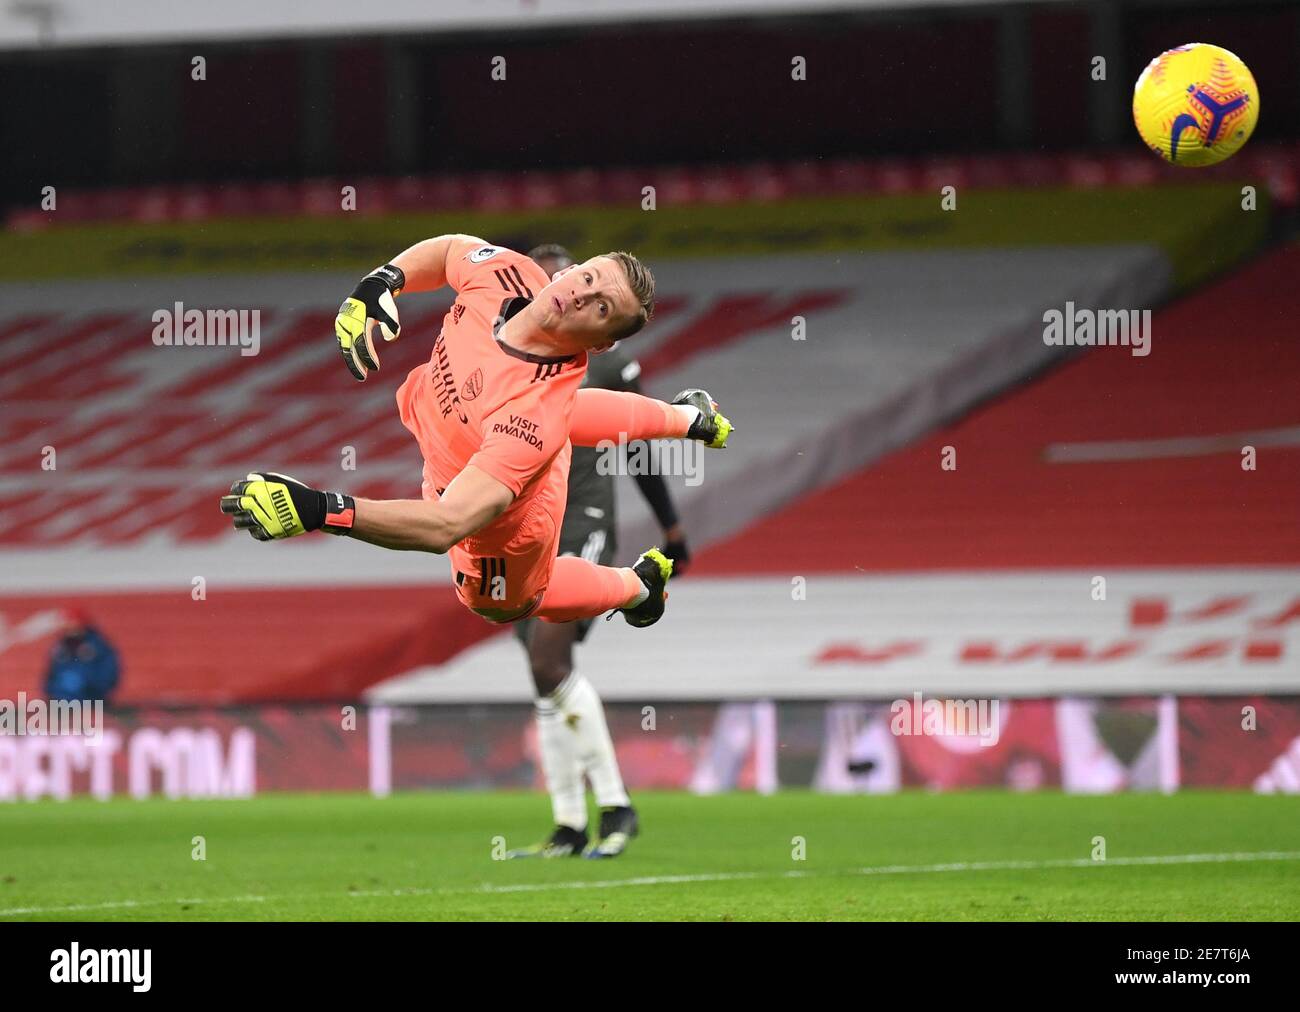 Arsenal goalkeeper Bernd Leno blocks a shot during the Premier League match  at the Emirates Stadium, London. Picture date: Saturday January 30, 2021  Stock Photo - Alamy